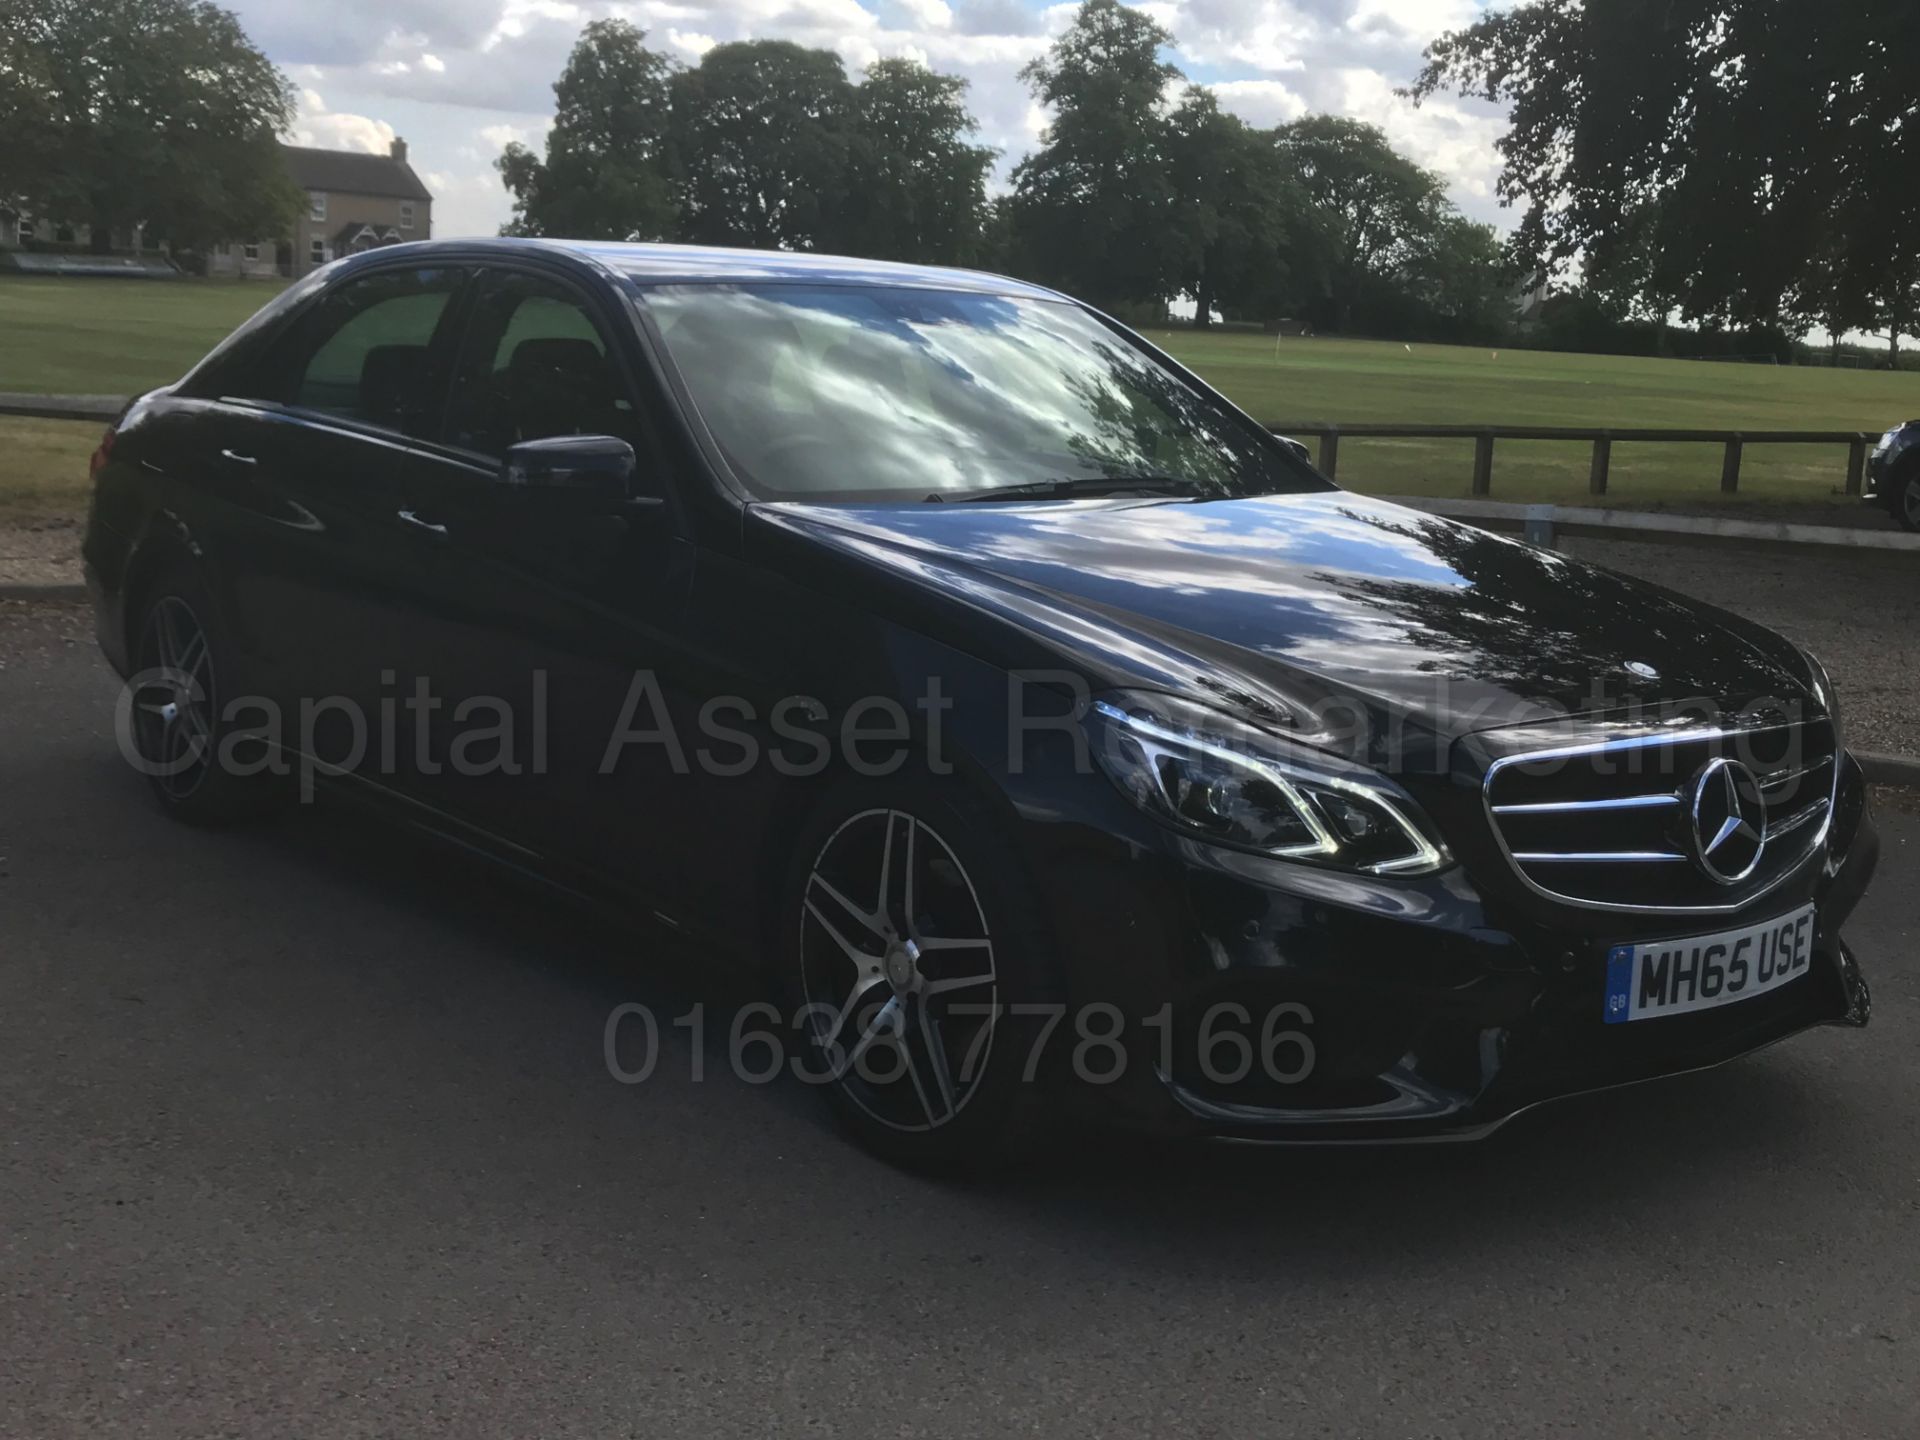 MERCEDES-BENZ E220D *AMG - NIGHT EDITION* SALOON (2016) '7G AUTO - LEATHER - SAT NAV' *LOW MILES* - Image 11 of 43